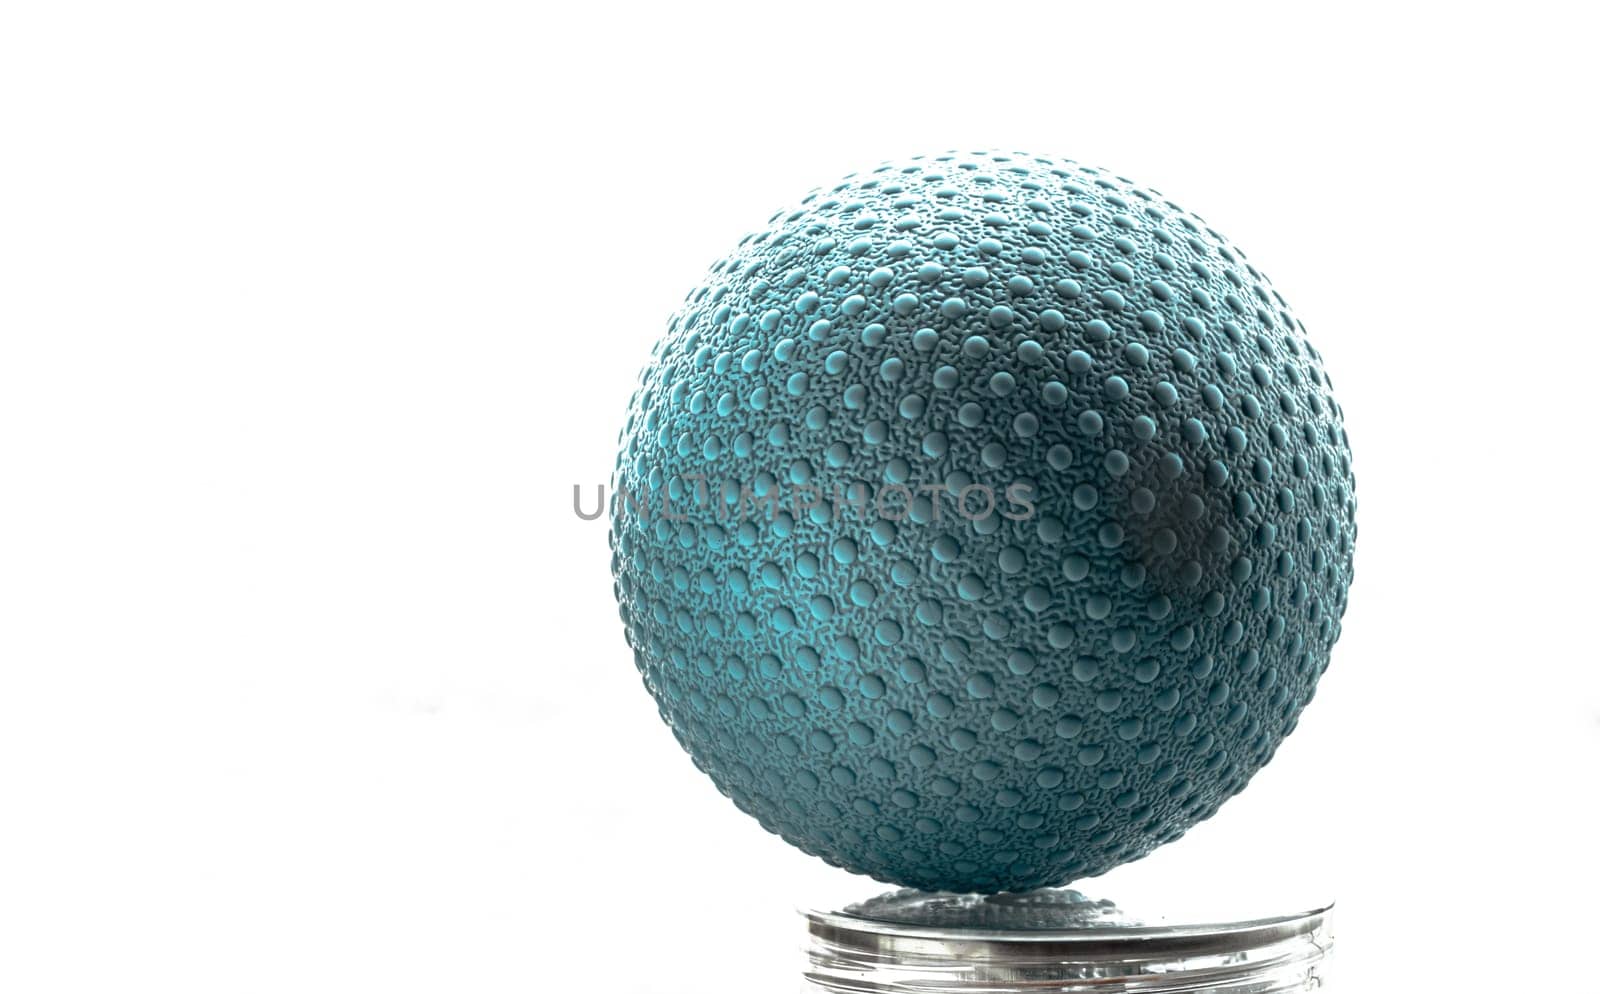 Lacrosse massage ball isolated on white background with space for text. Blue spherical ball, Rubber lacrosse ball, Selective focus.